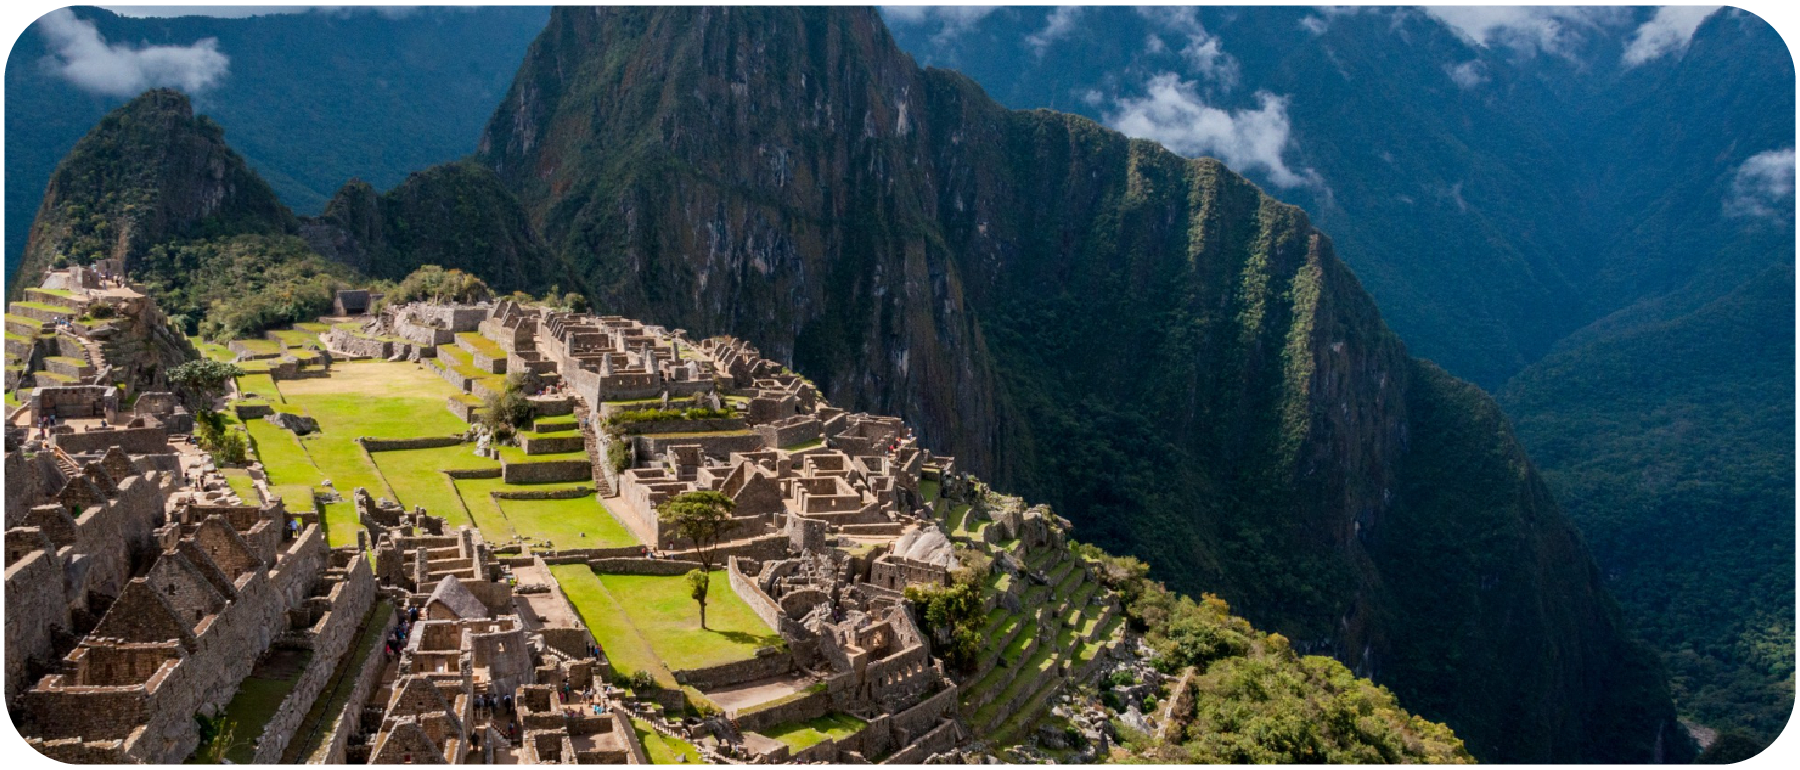 What do people eat in Machu Picchu